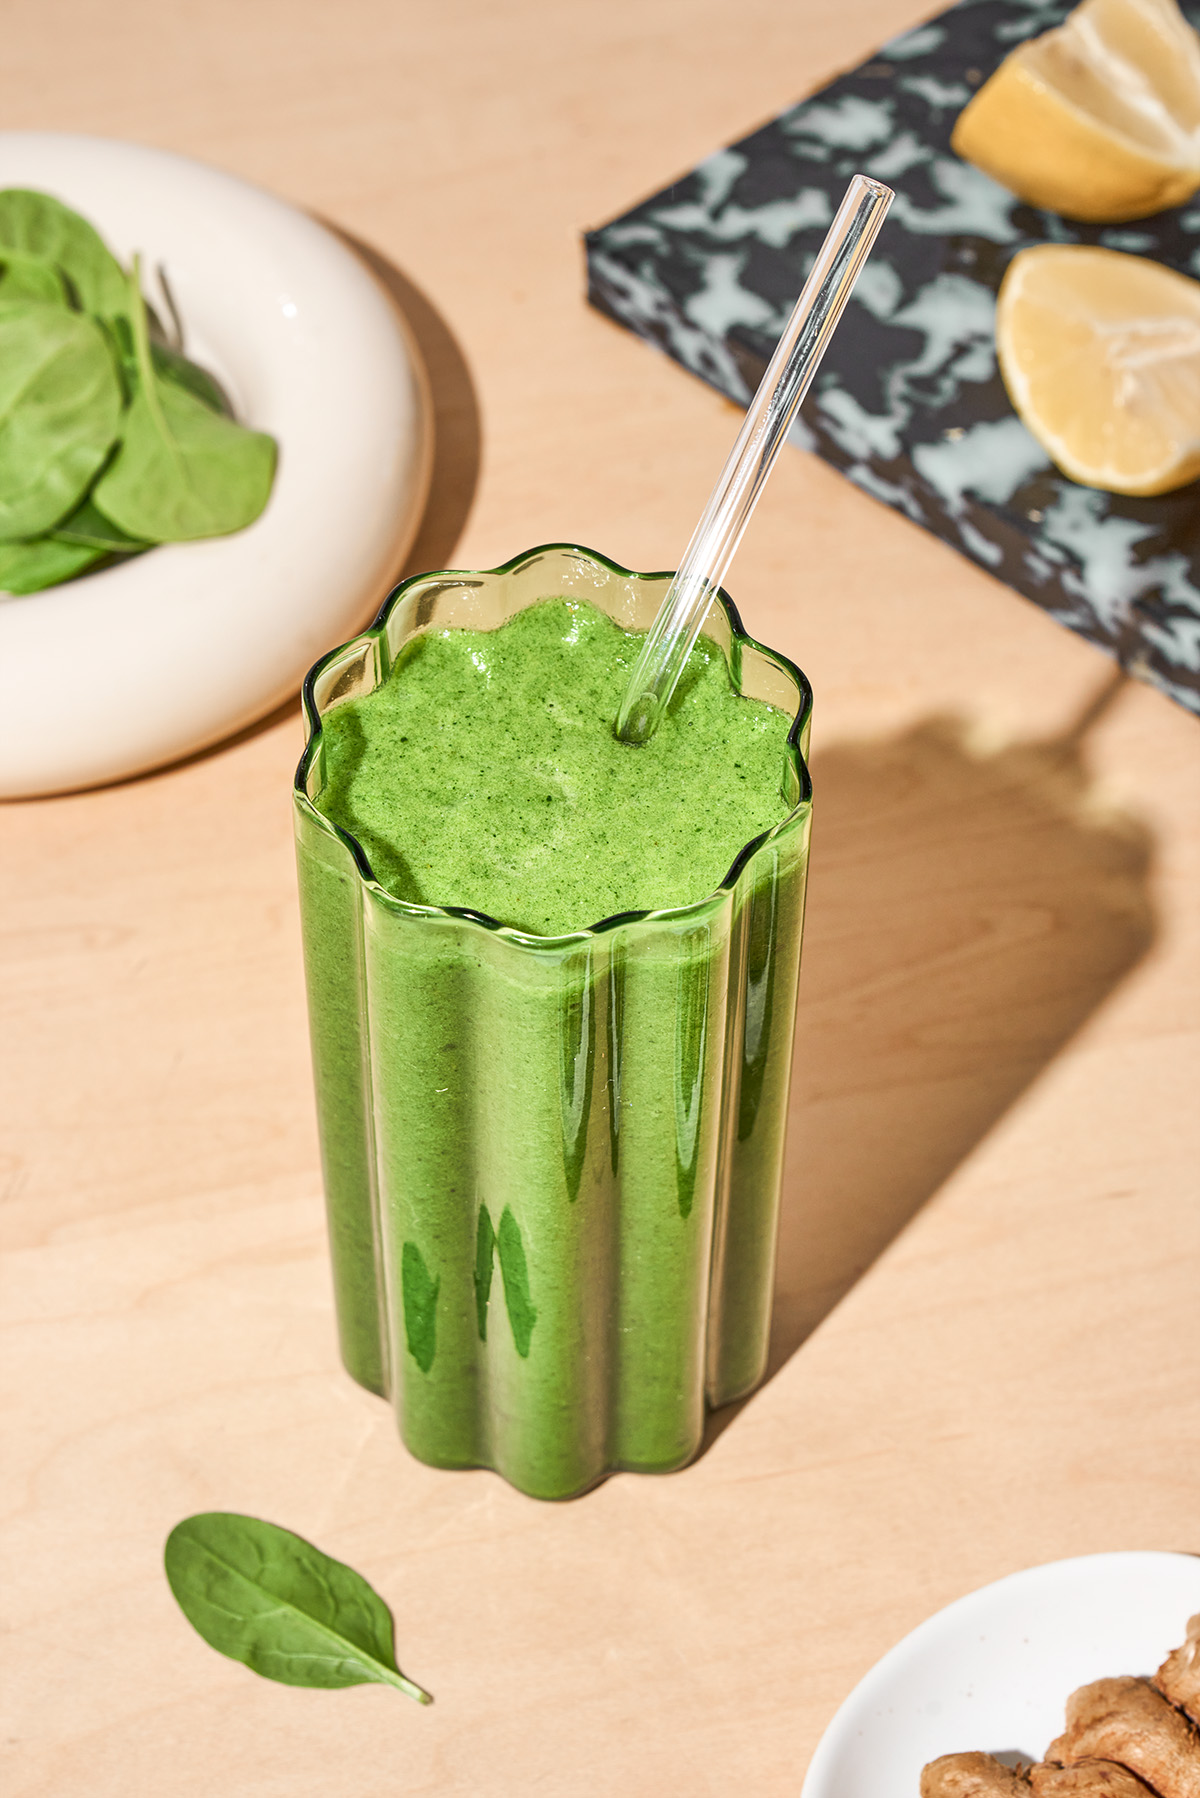 A wavy glass of green smoothie with a glass straw.